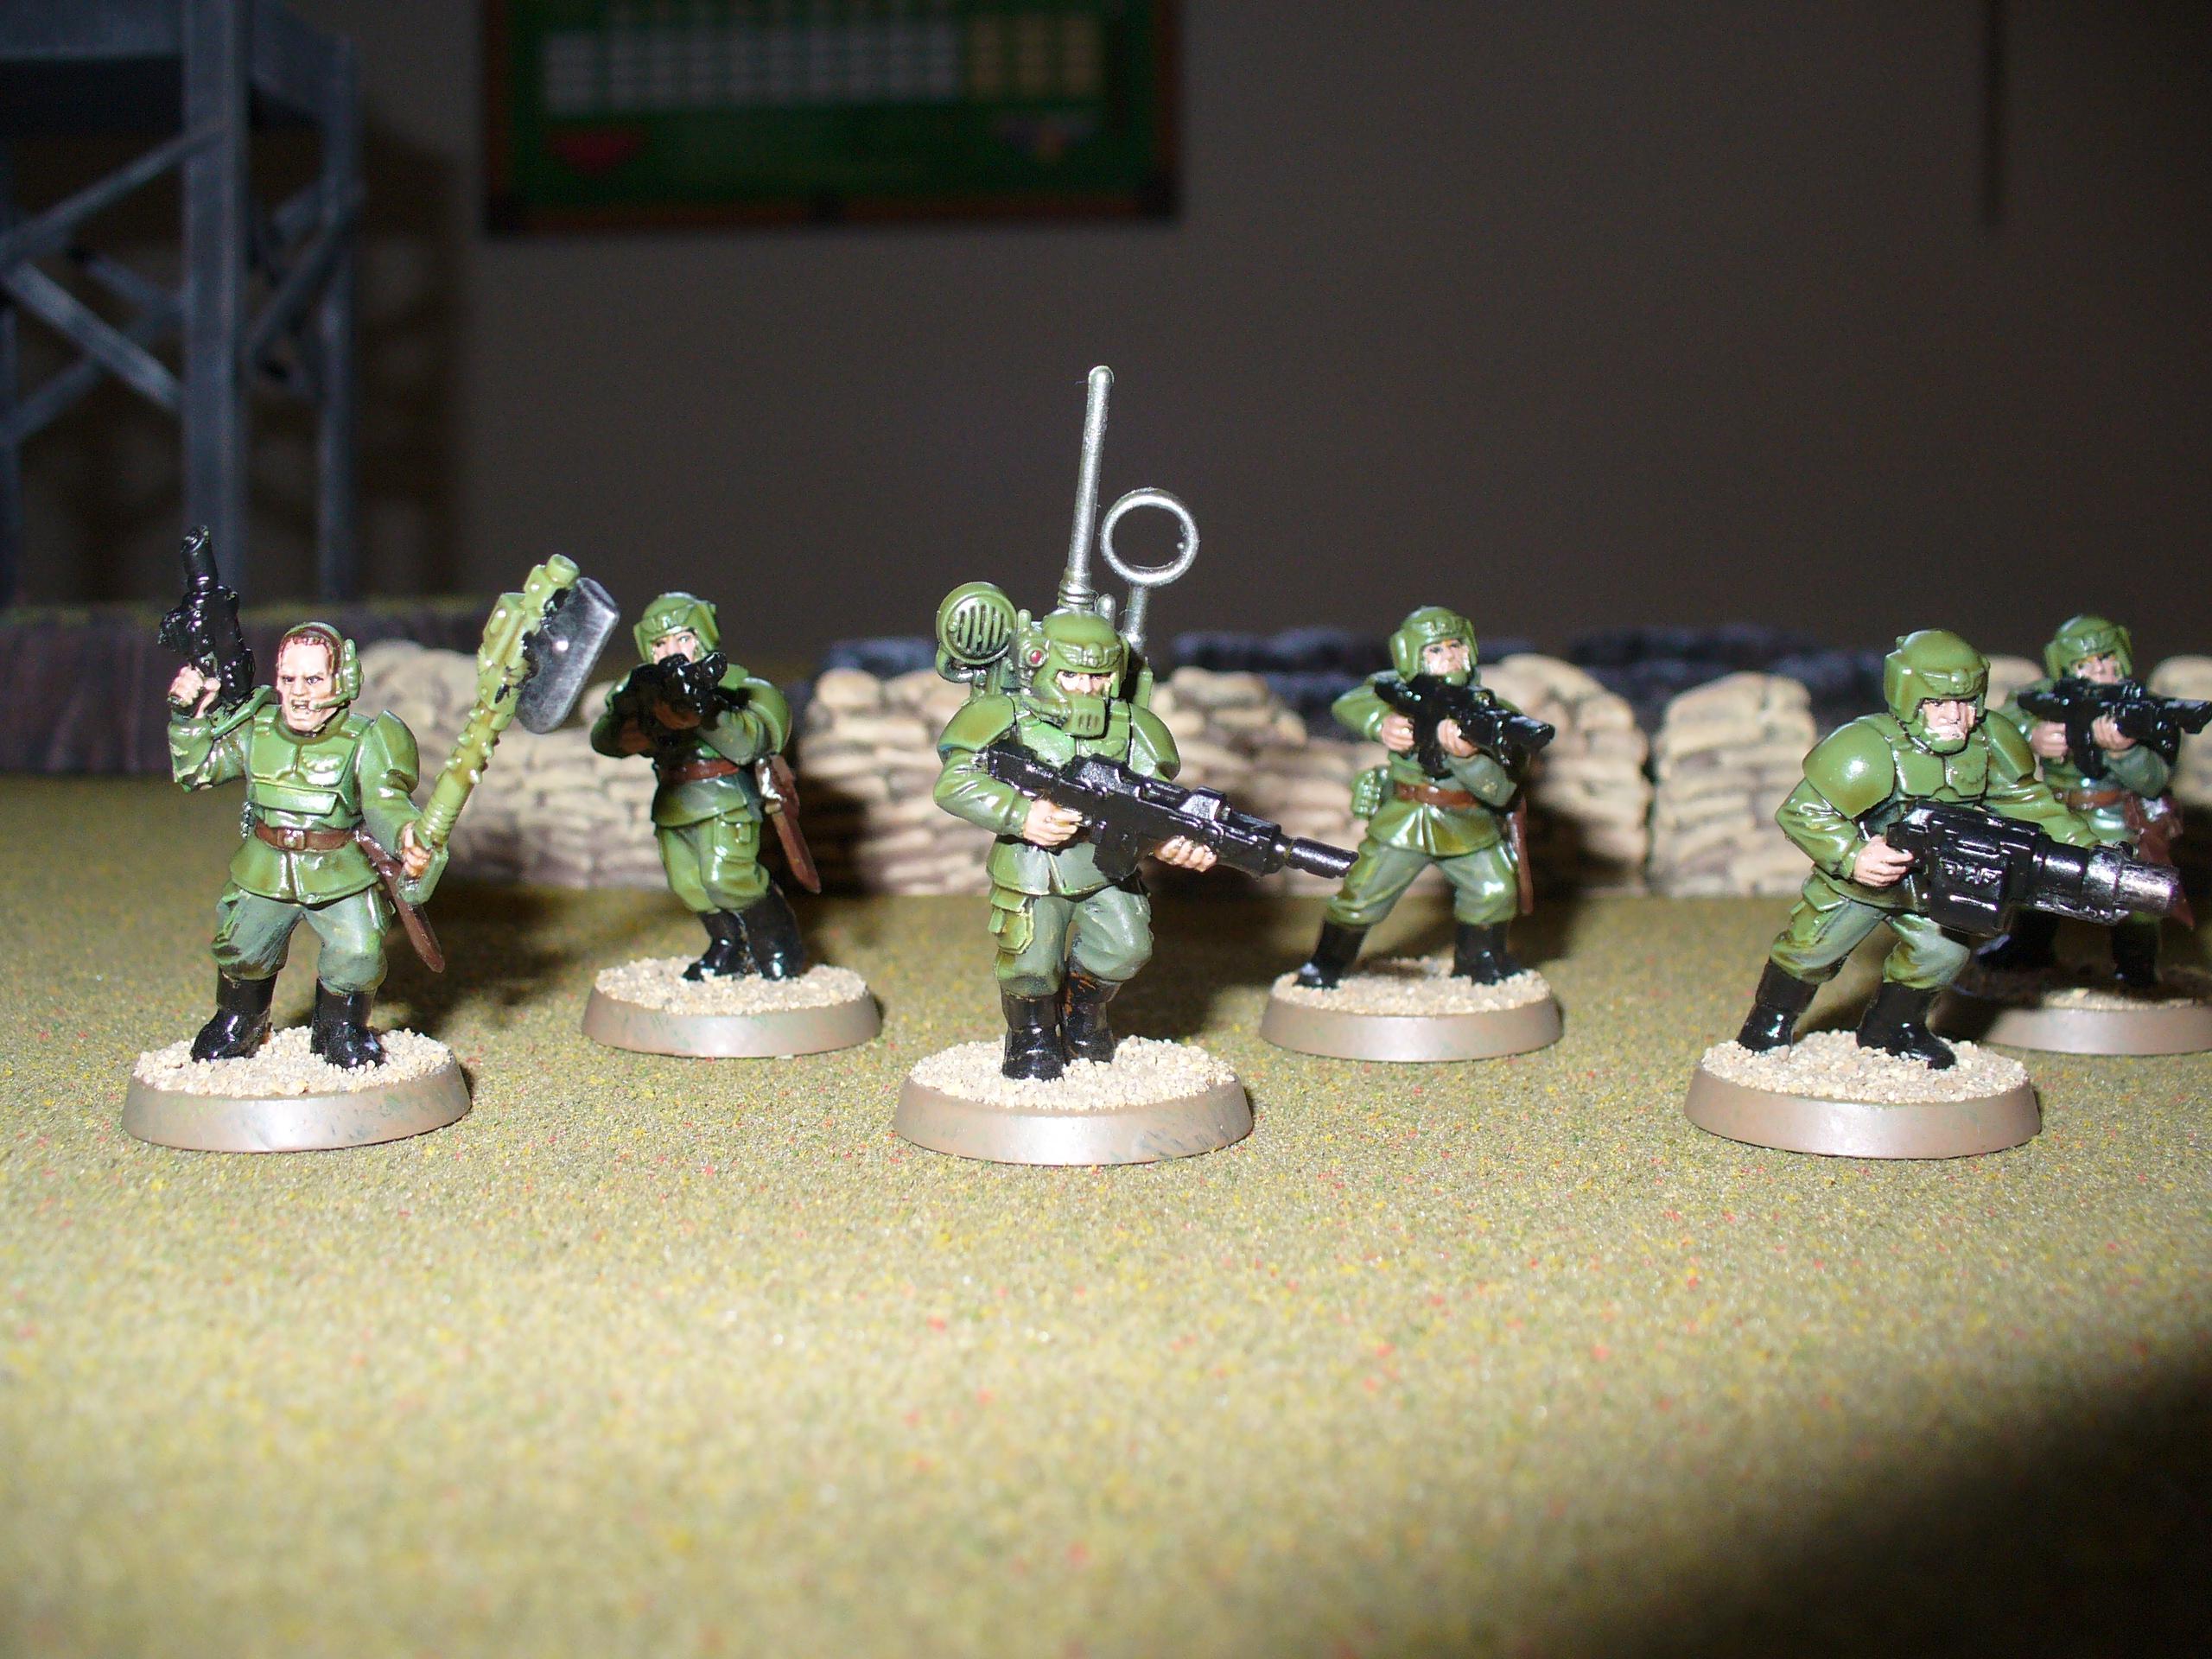 Close up of Sgt, Vox, and Grenade Launcher